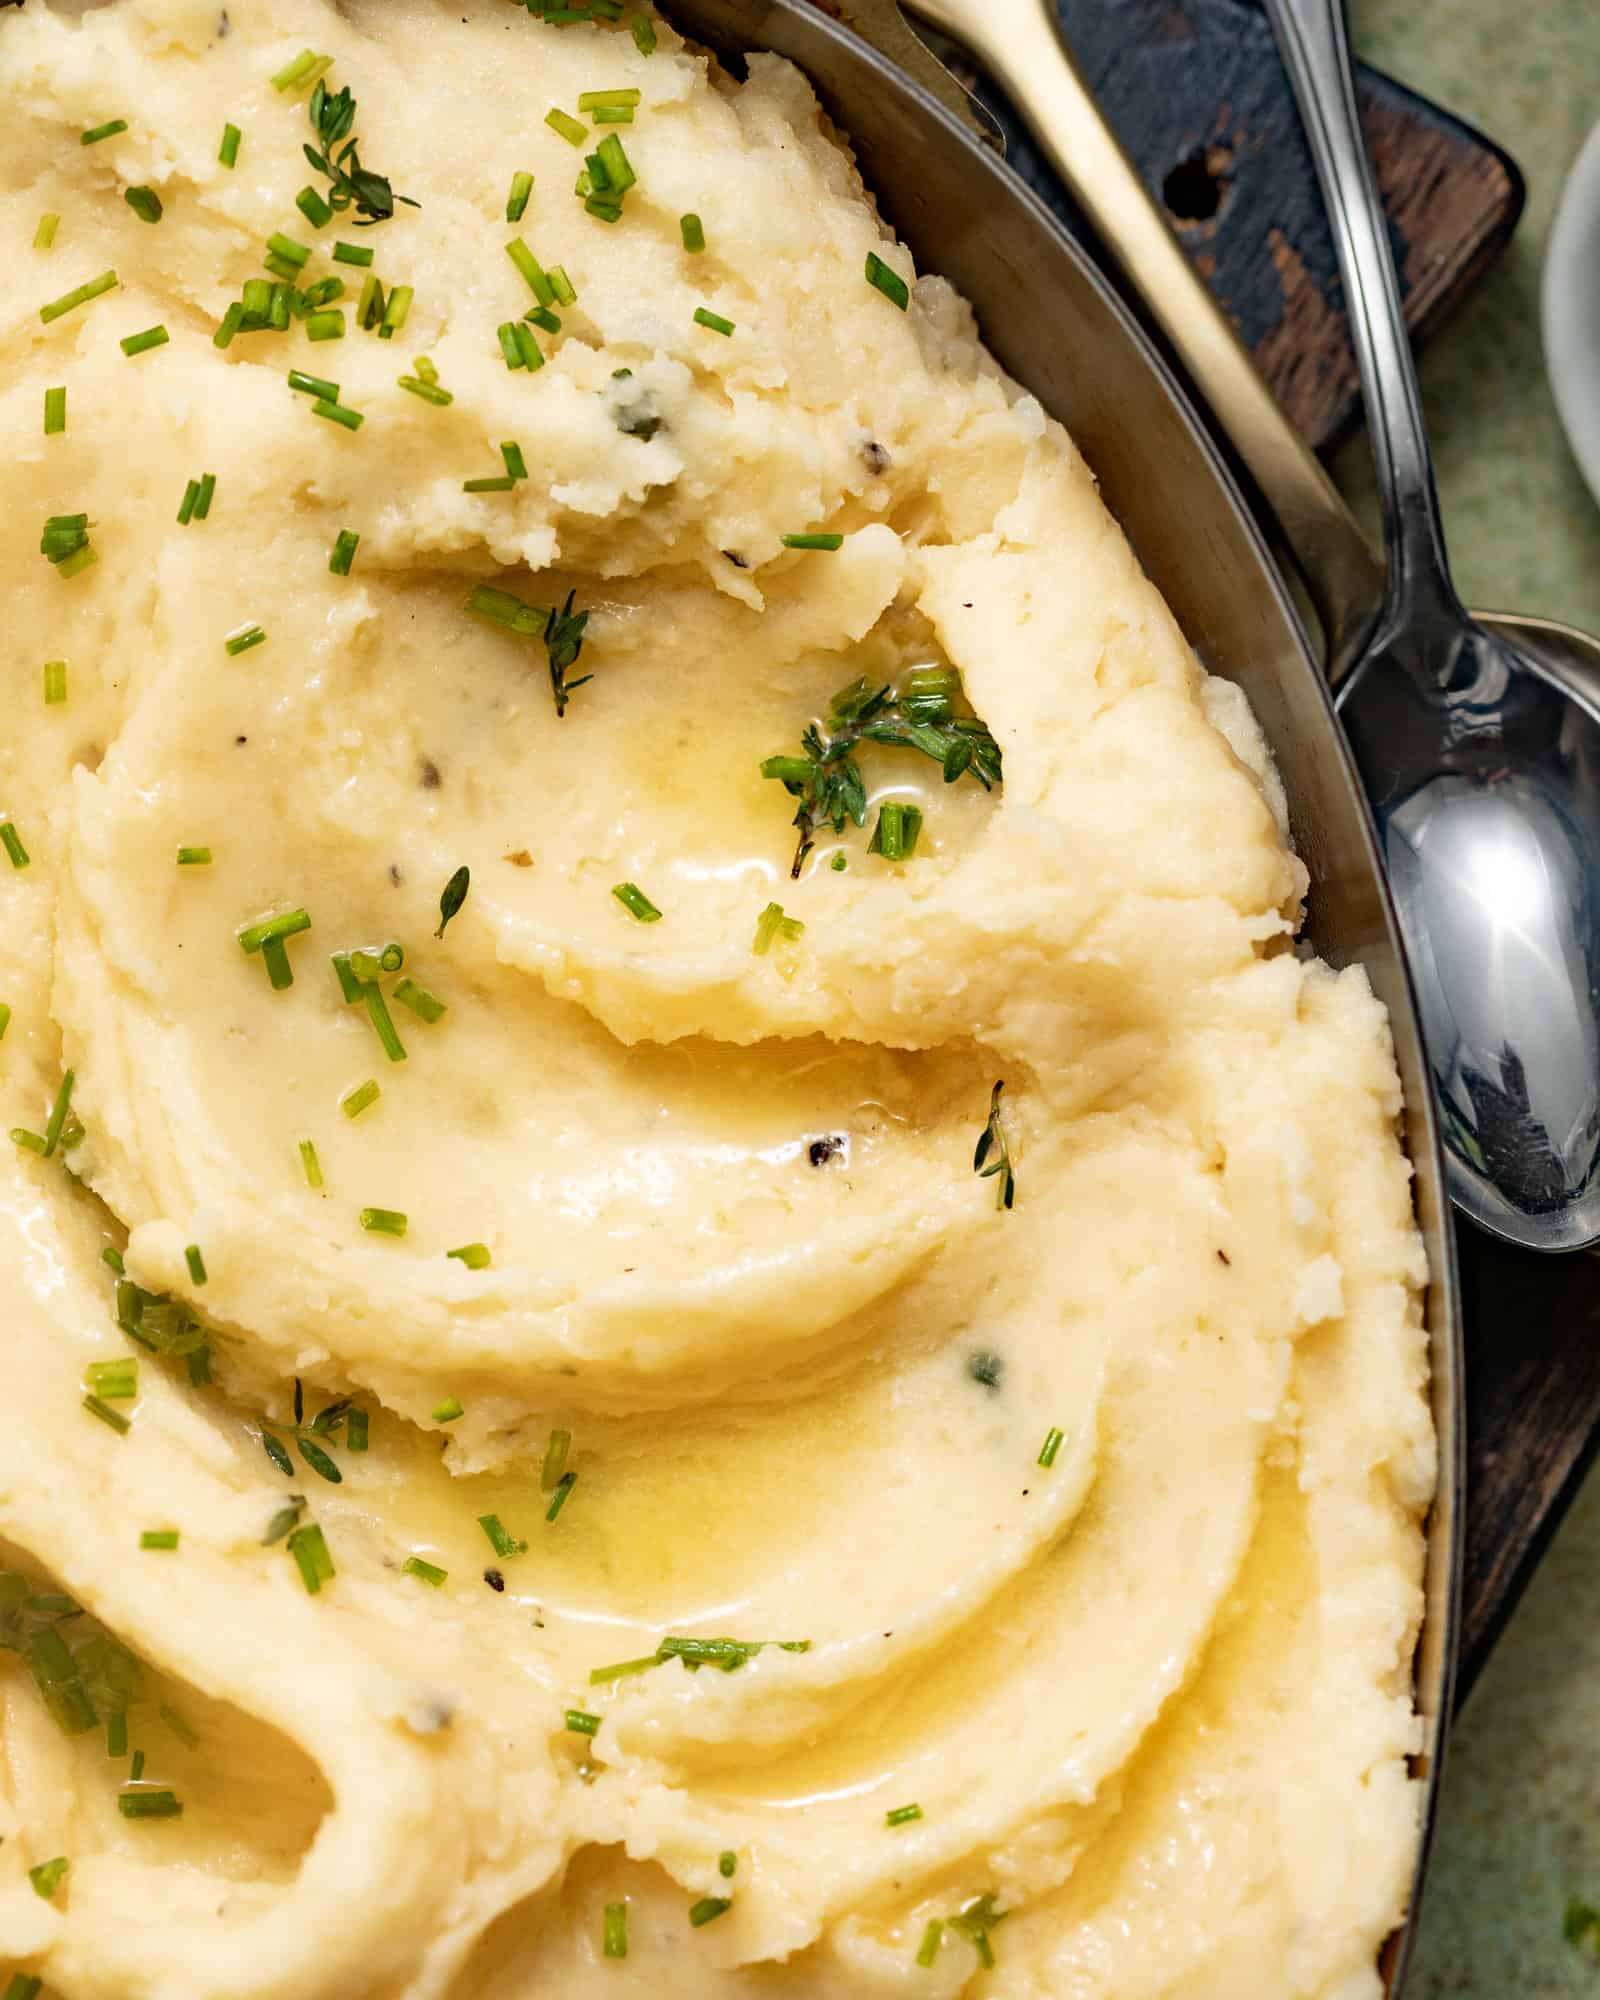 Butter melted over the top of cheesy mashed potatoes.